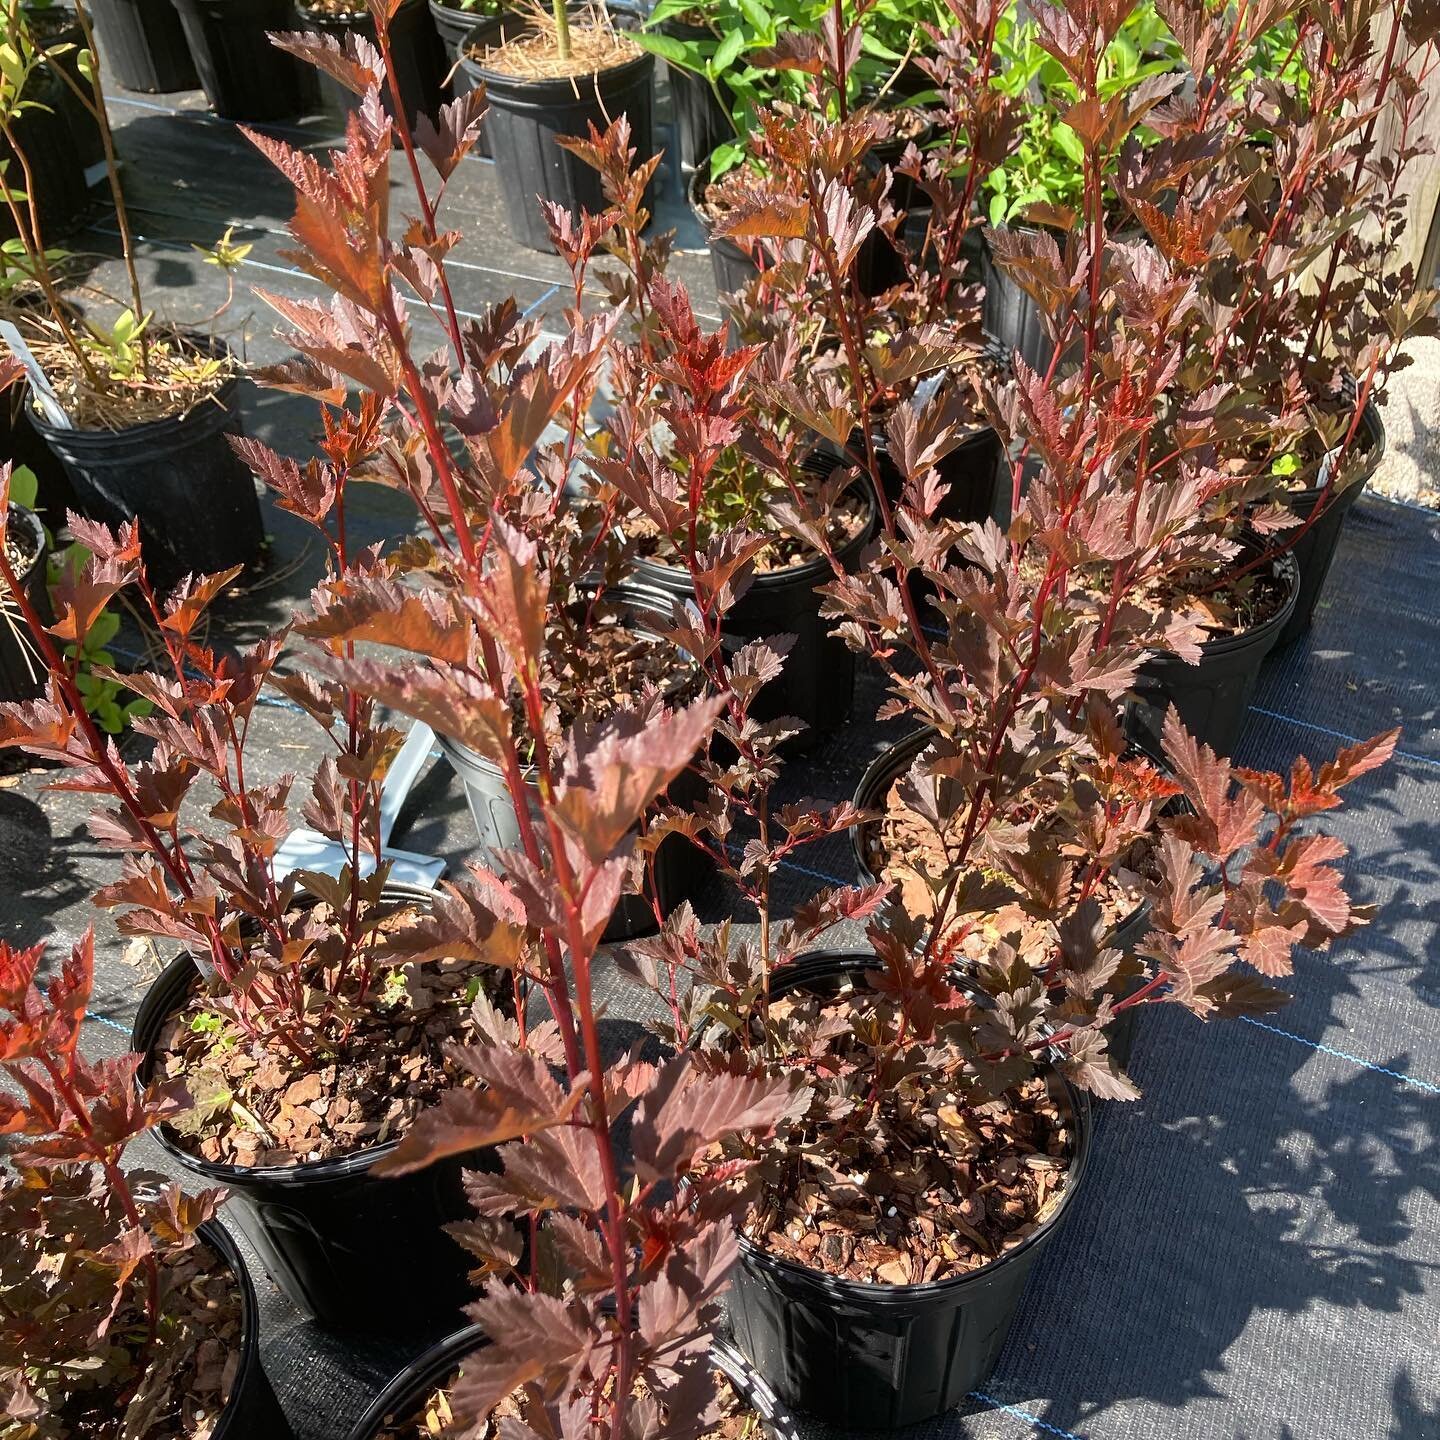 Diabolo purple leaved Ninebark is back in stock! Limited 10 gallons available at the moment! :-) And yes there was a caterpillar munching one of them! 

#diaboloninebark #plantnative